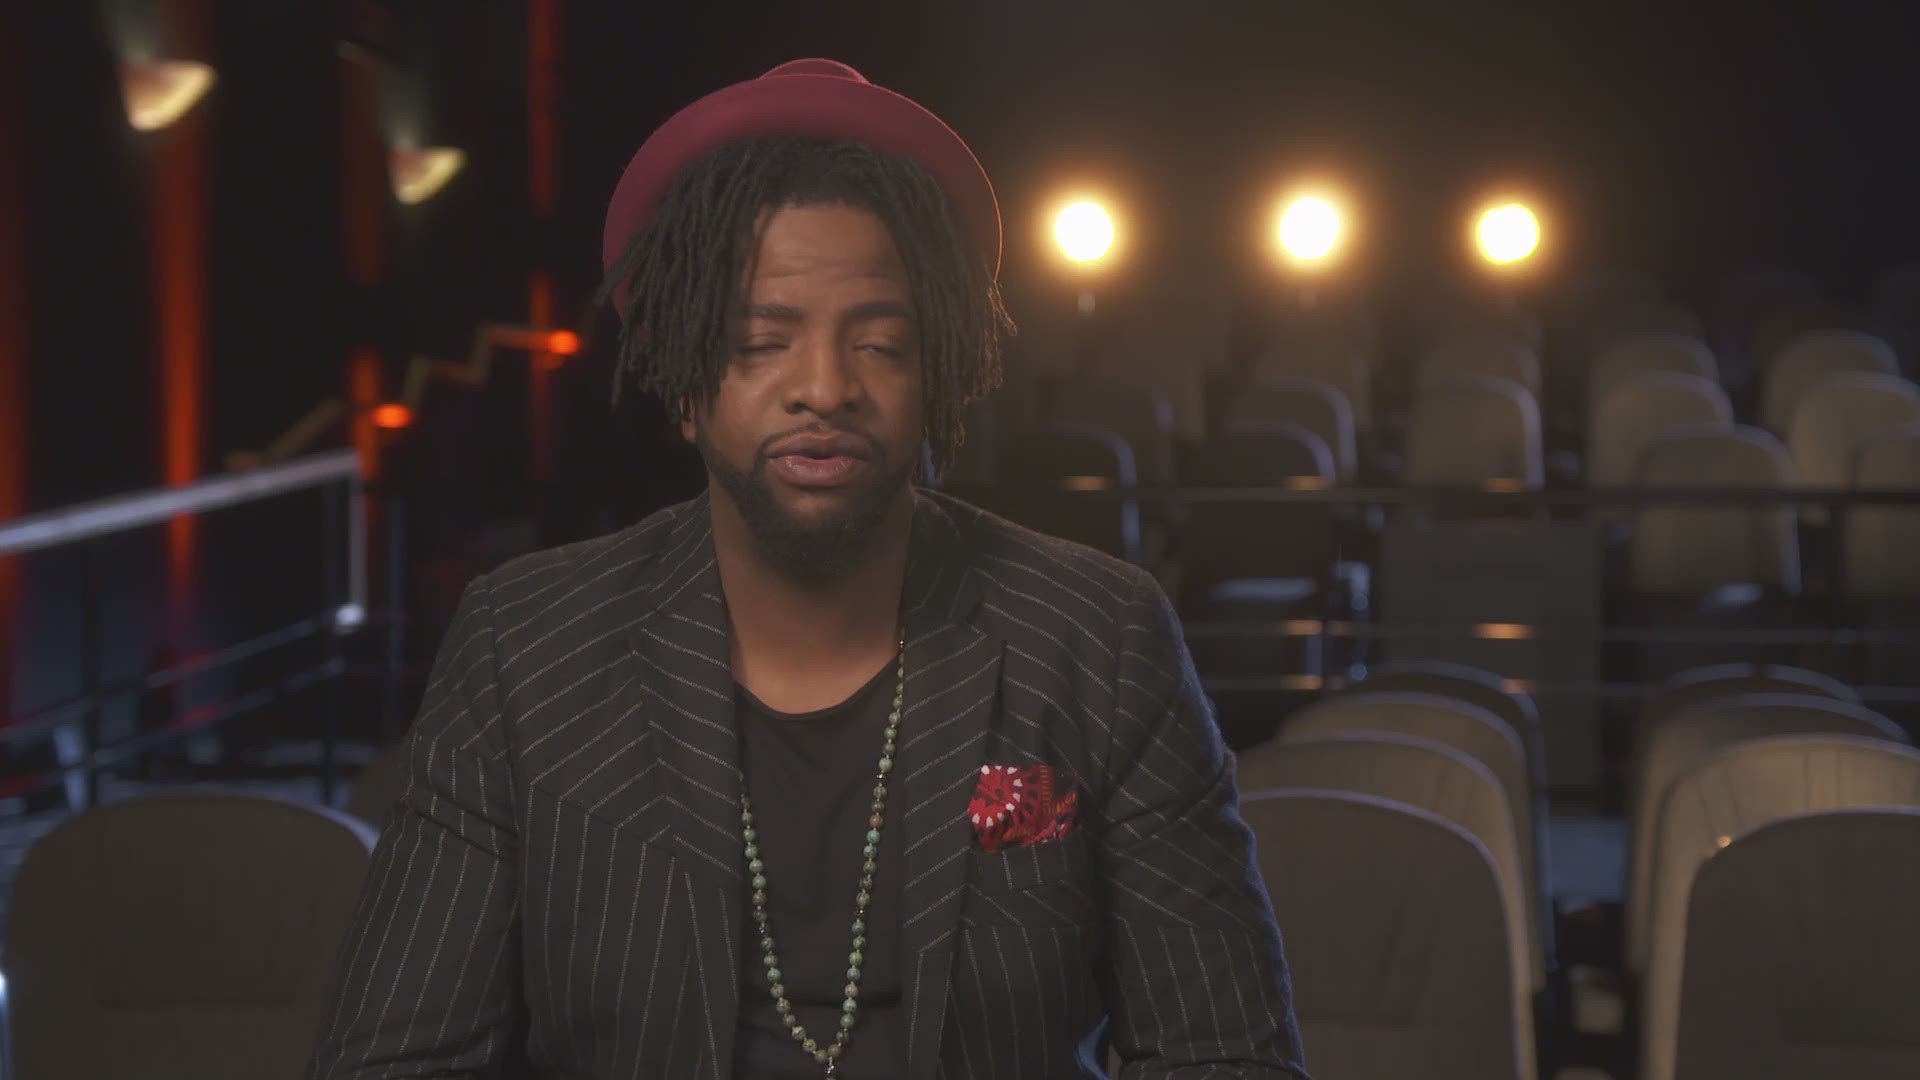 Cleveland native DR King has made it to the Top 24 on The Voice and will now be performing live in the hopes that America will vote him on to the next round.  Here are his thoughts on making it this far and what he has planned moving forward.